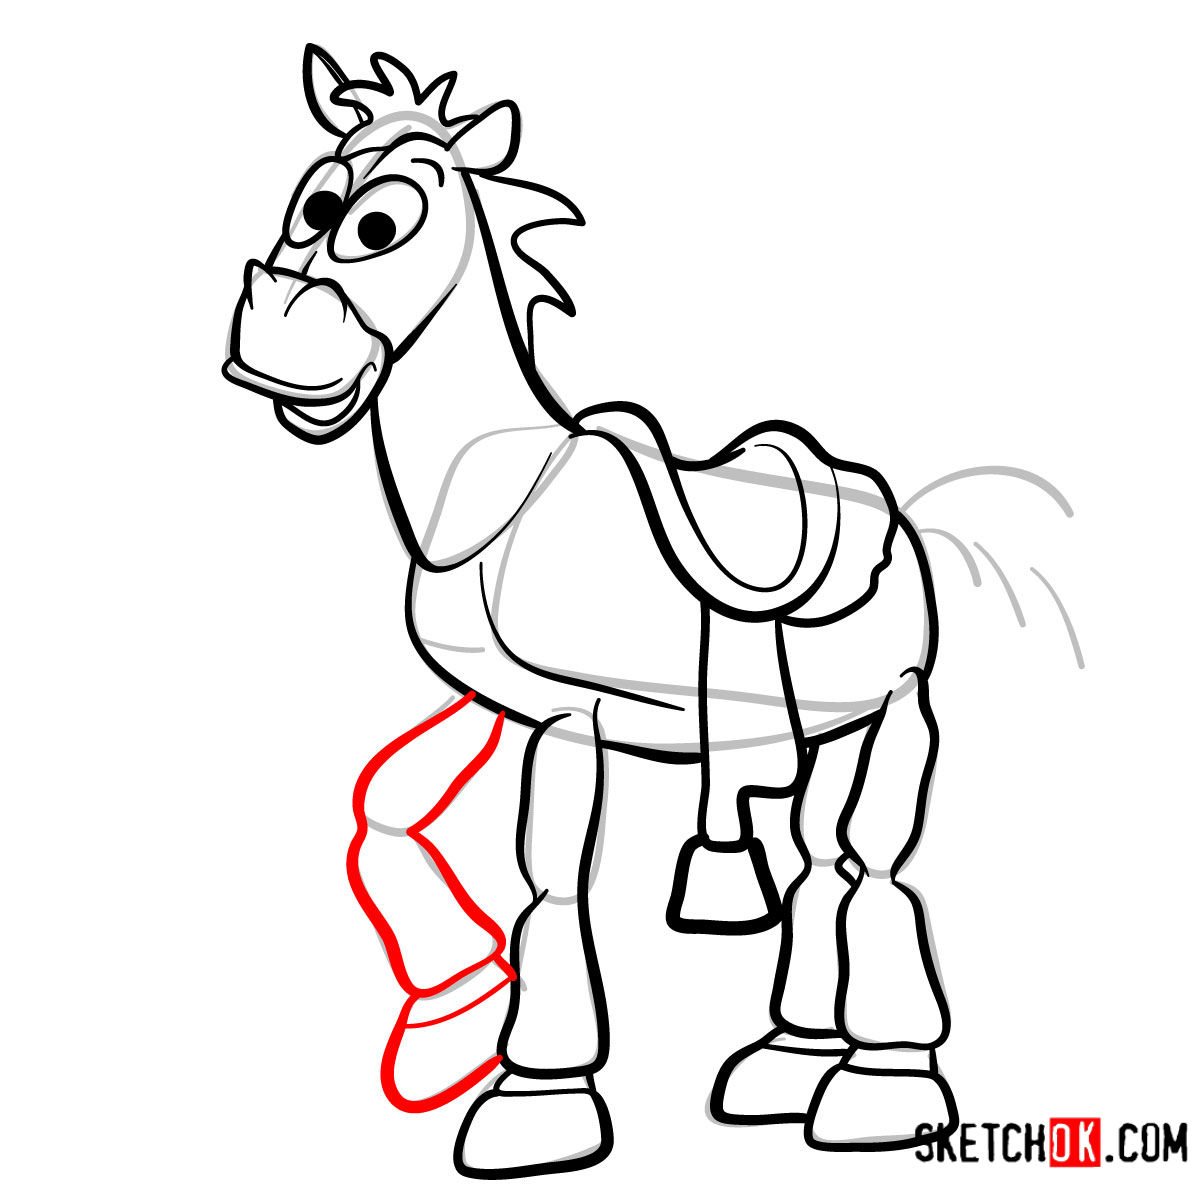 How to draw Bullseye from Toy Story - step 10